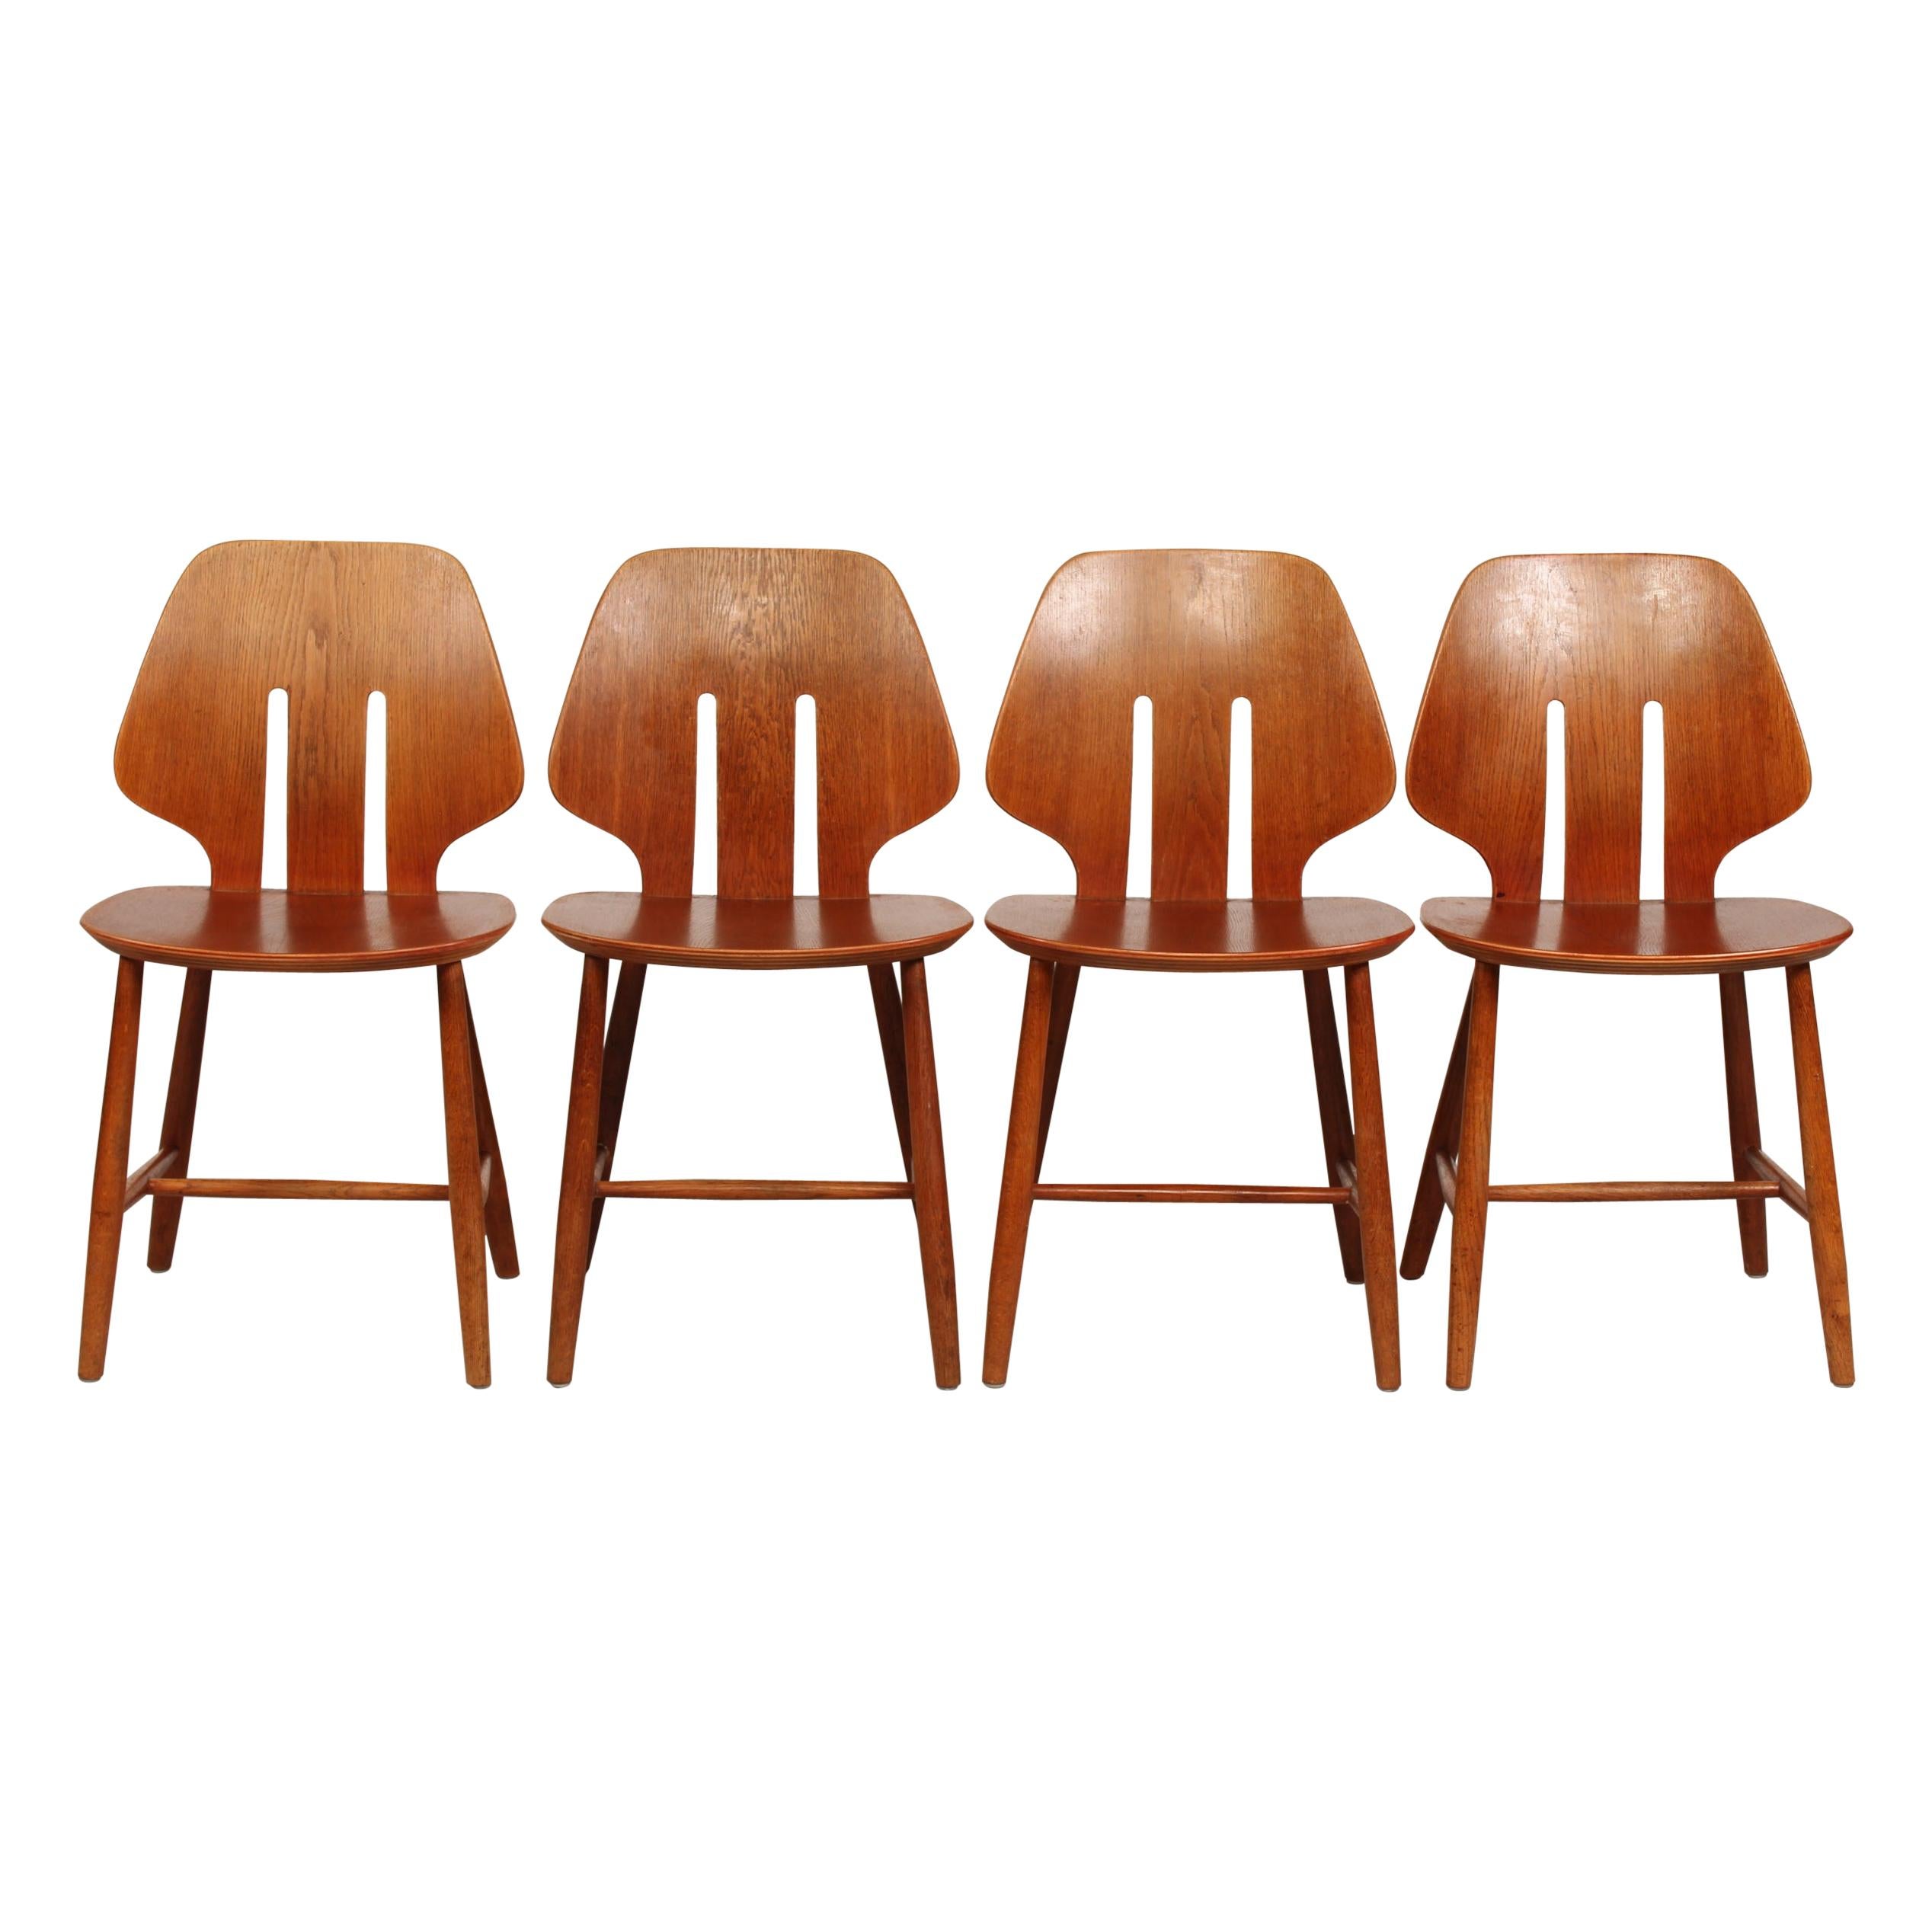 Ejvind A Johansson Set of Four Chairs for FDB Model No. J 67 Made of Oak, 1950s